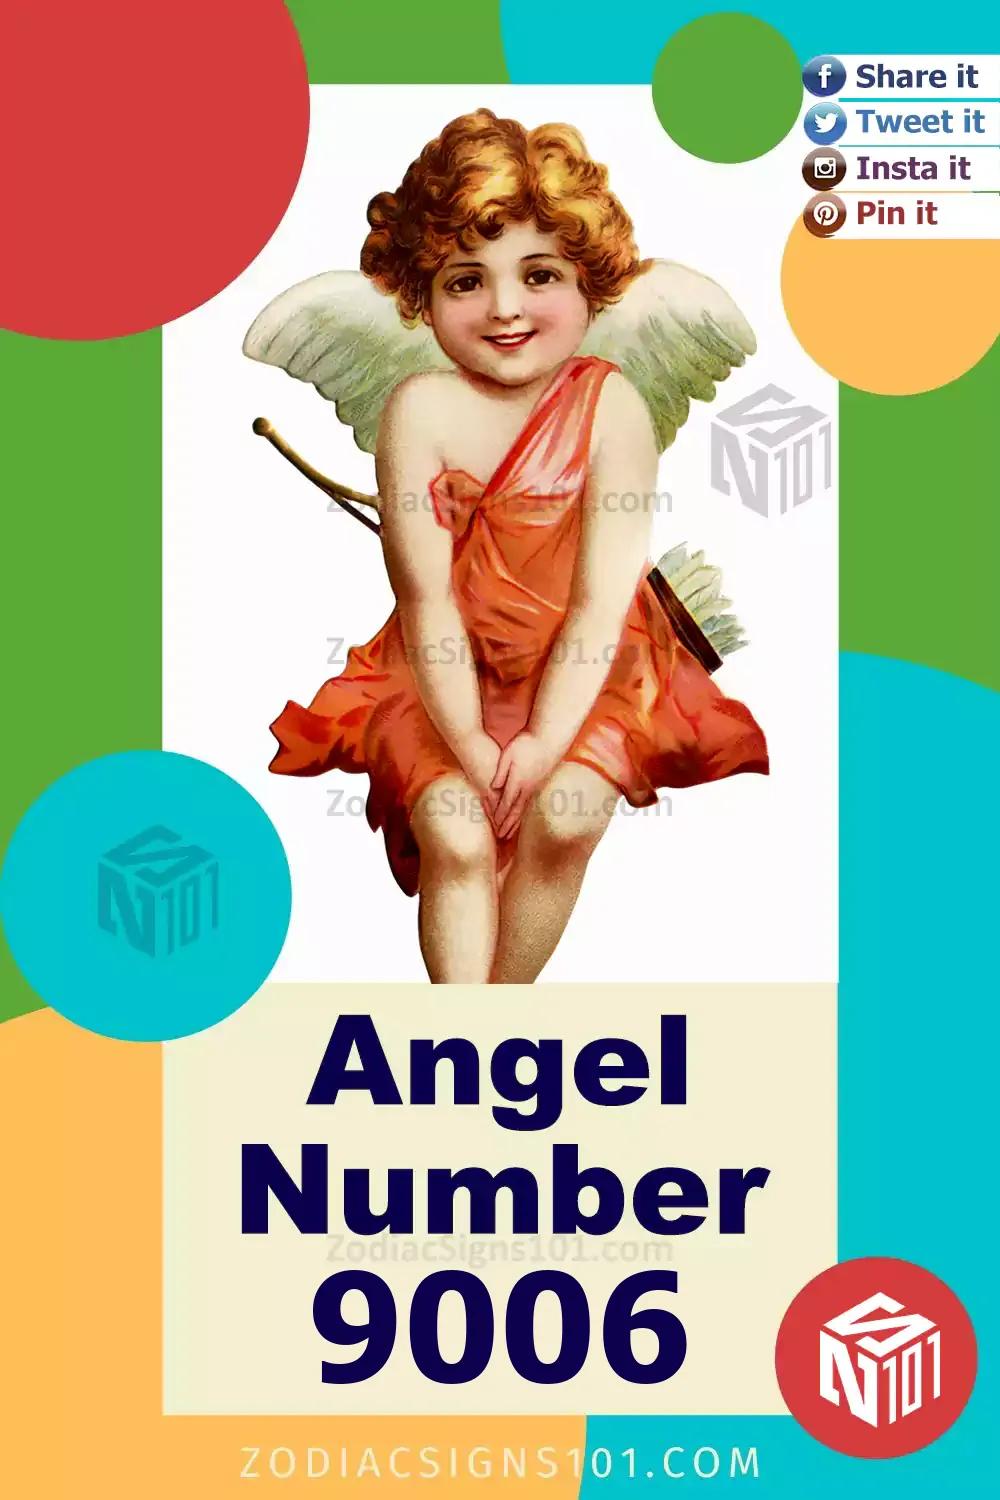 9006 Angel Number Meaning